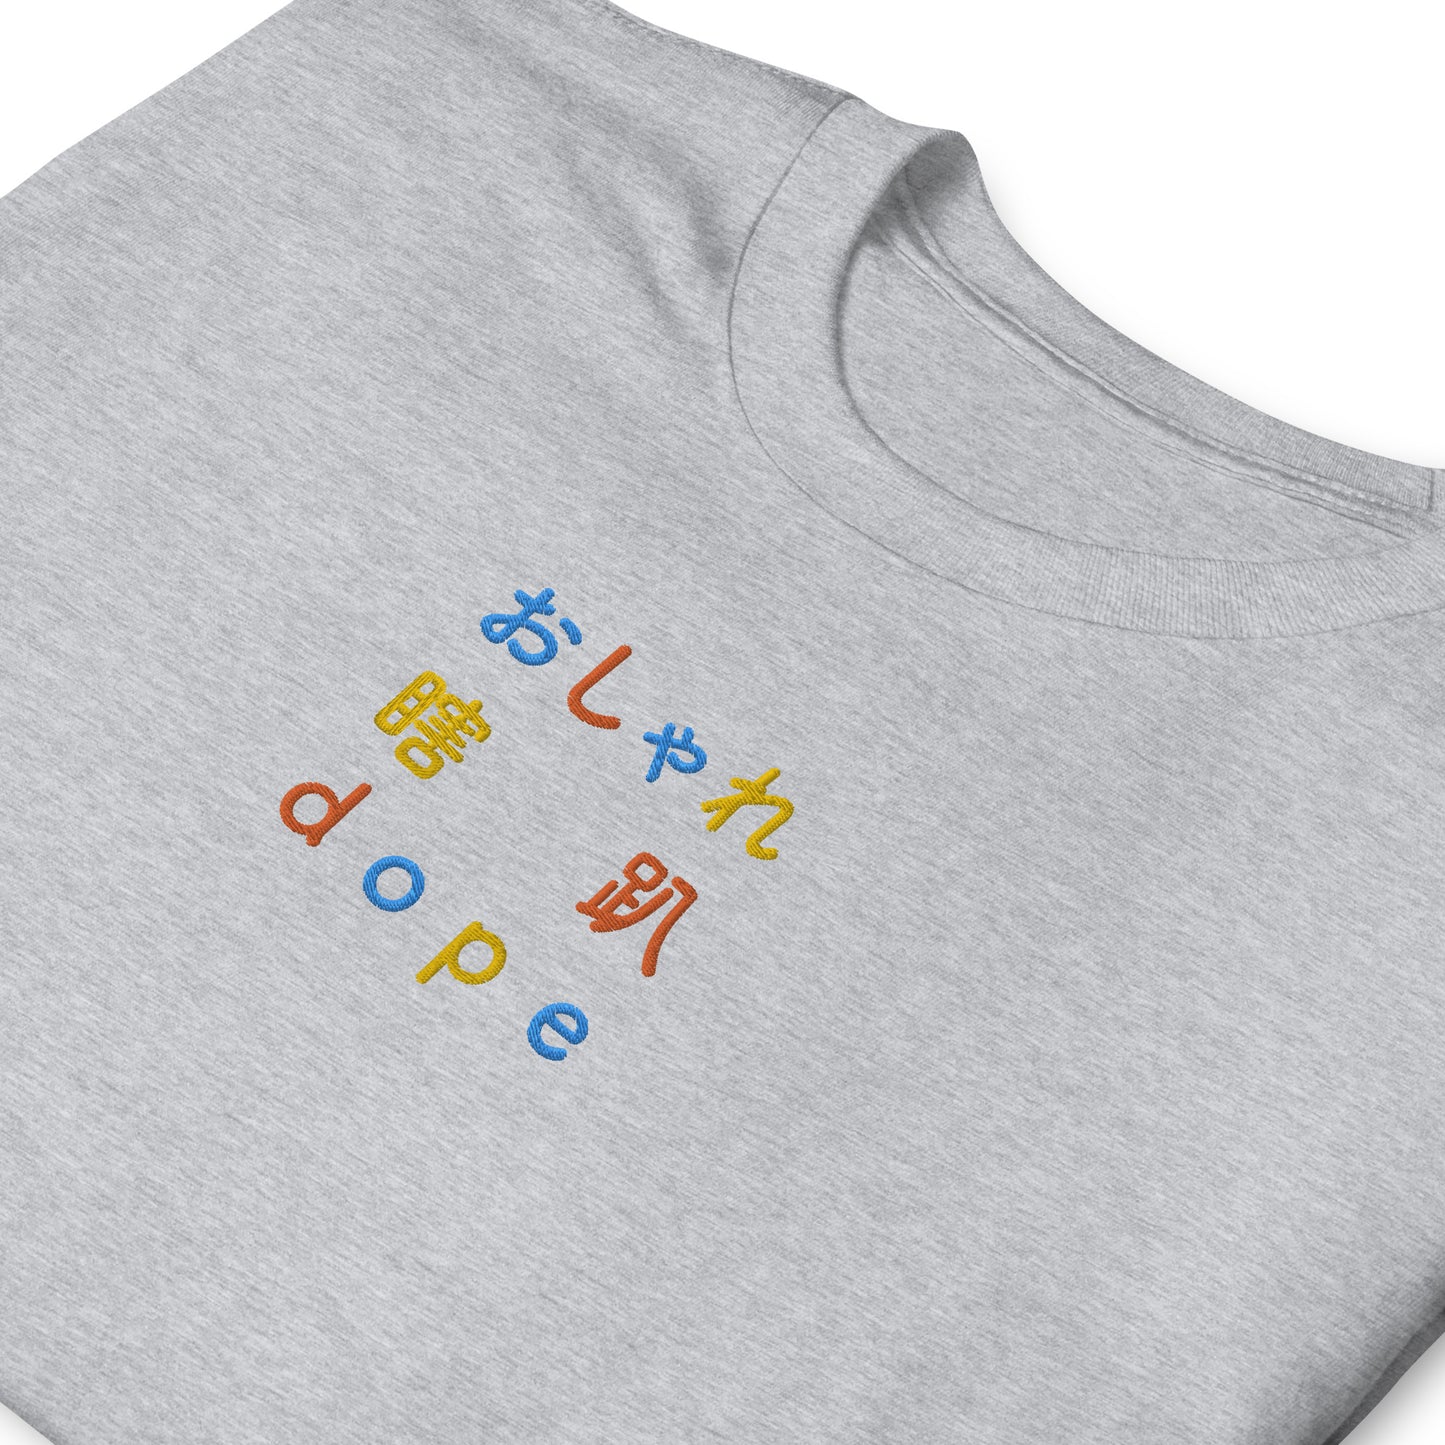 Light Gray High Quality Tee - Front Design with an Blue, Orange, Yellow Embroidery "Dope" in Japanese,Chinese and English